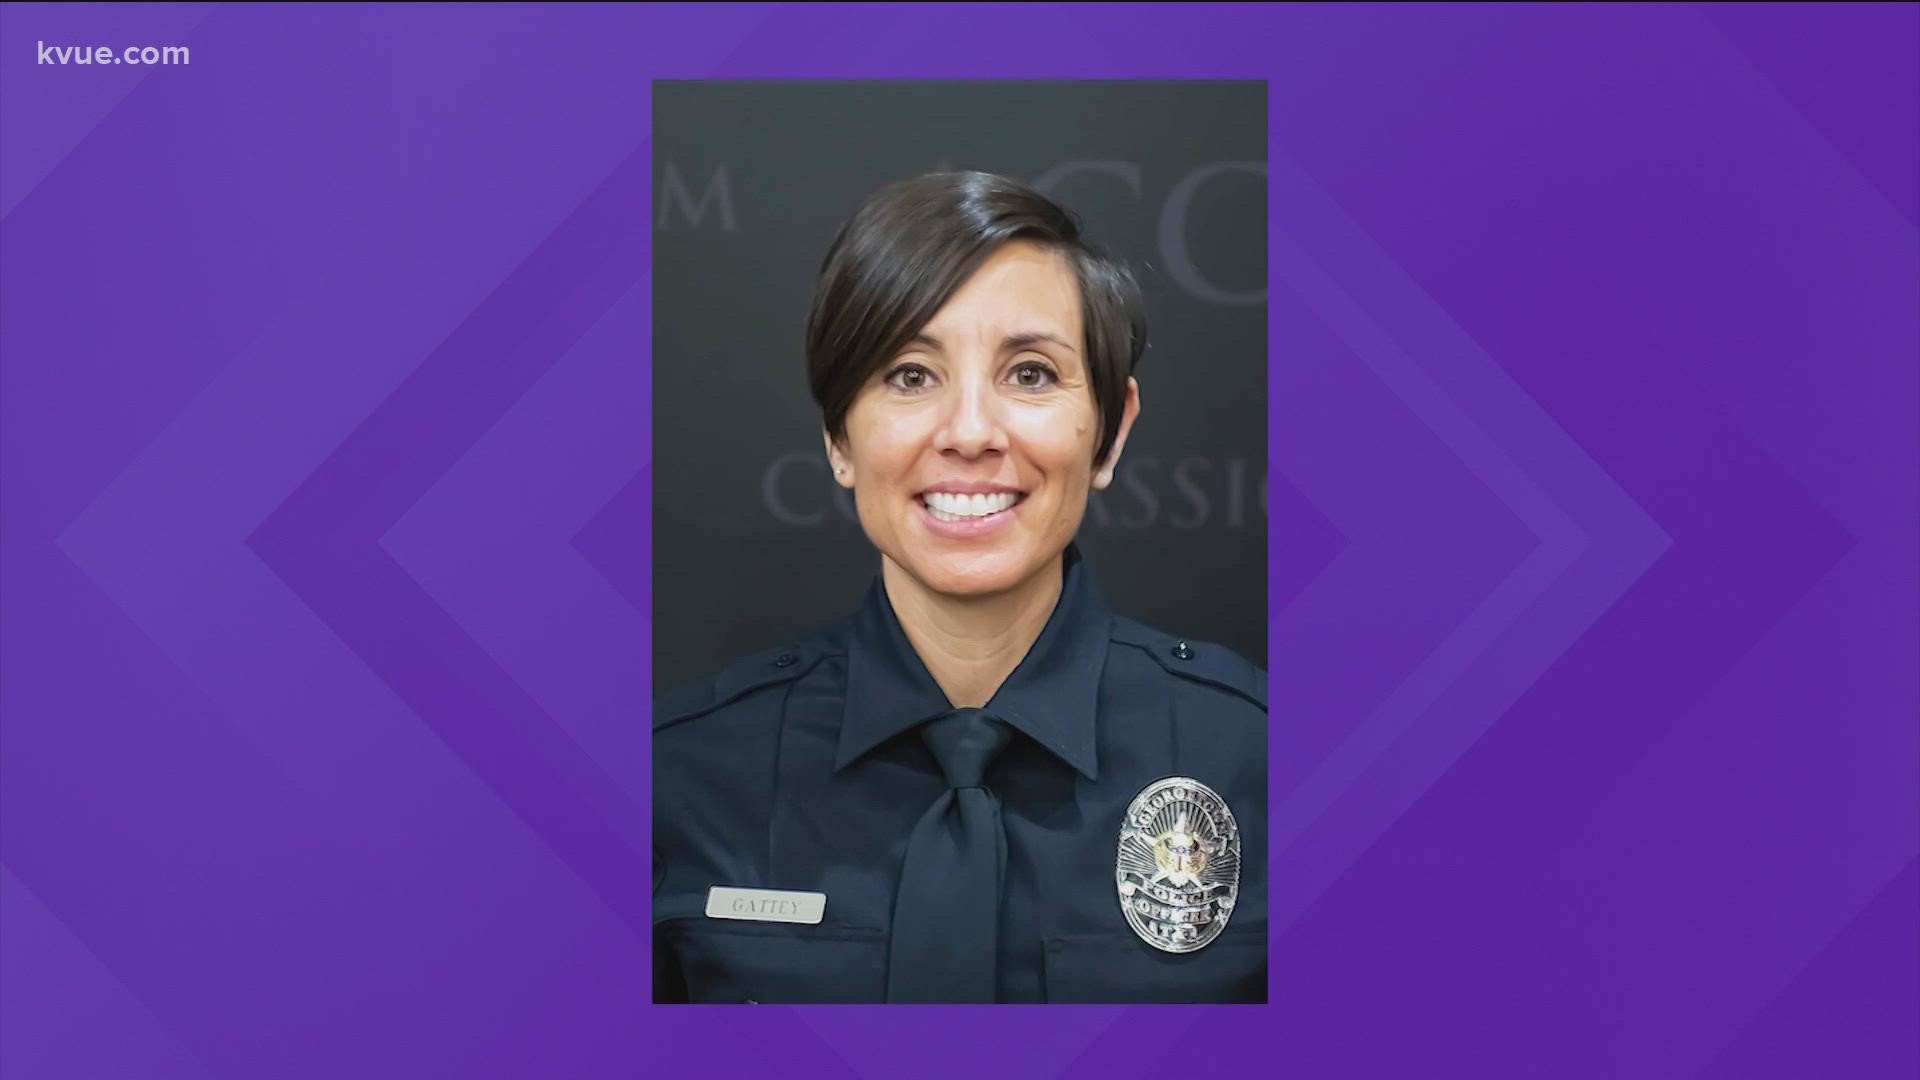 Georgetown Police Department Officer Michelle Gattey, 44, served in the U.S. Air Force for 23 years before joining the department.